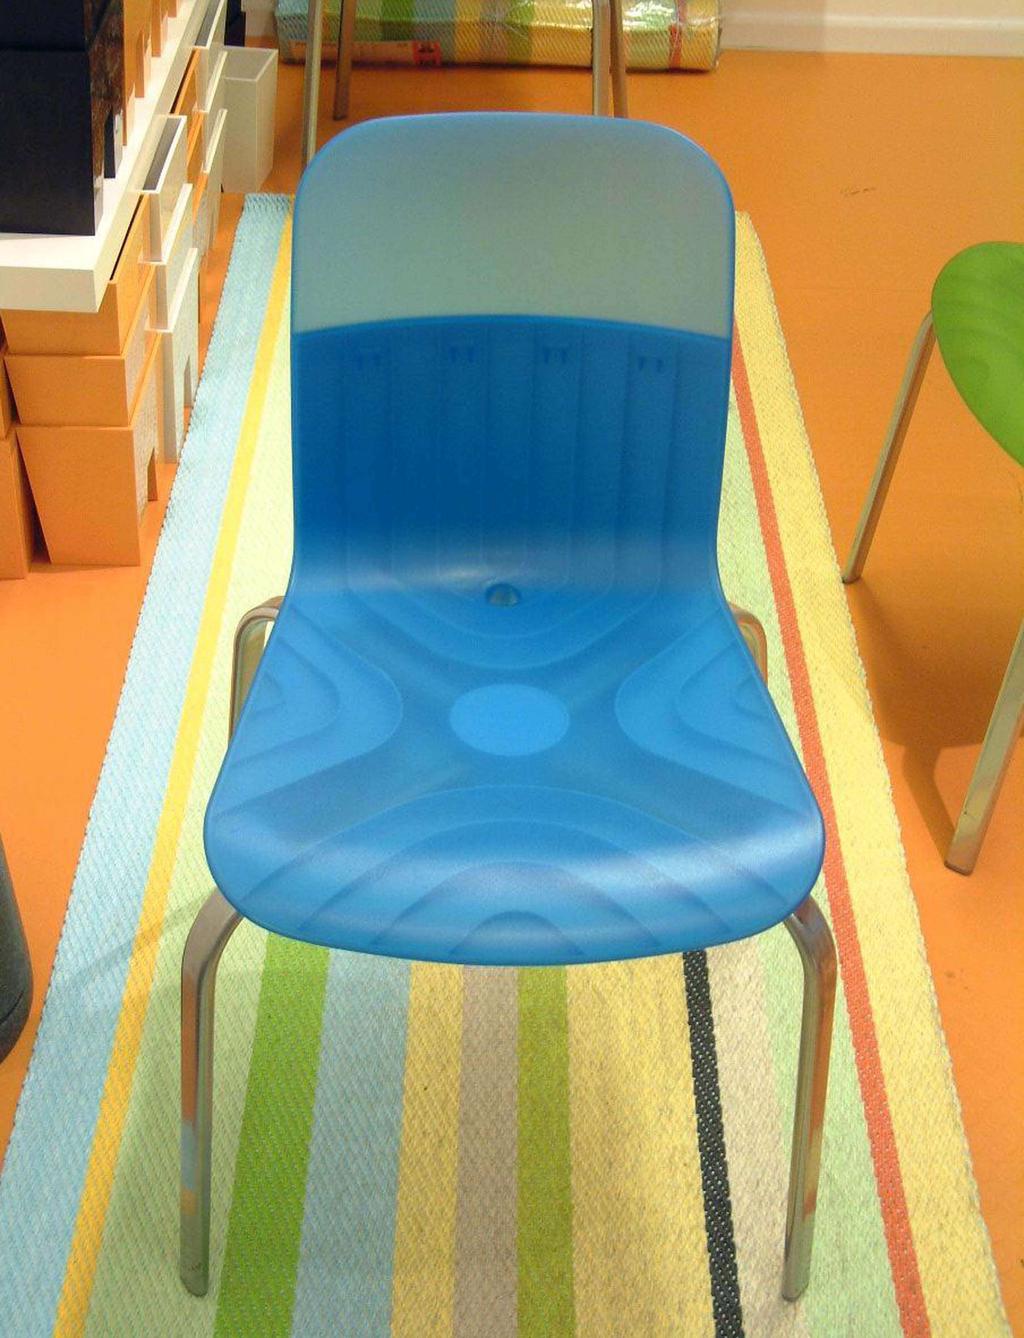 3 A modern looking chair in two materials. Notice the pattern and translucent effect of the seat allows you to see the positioning of the legs underneath.